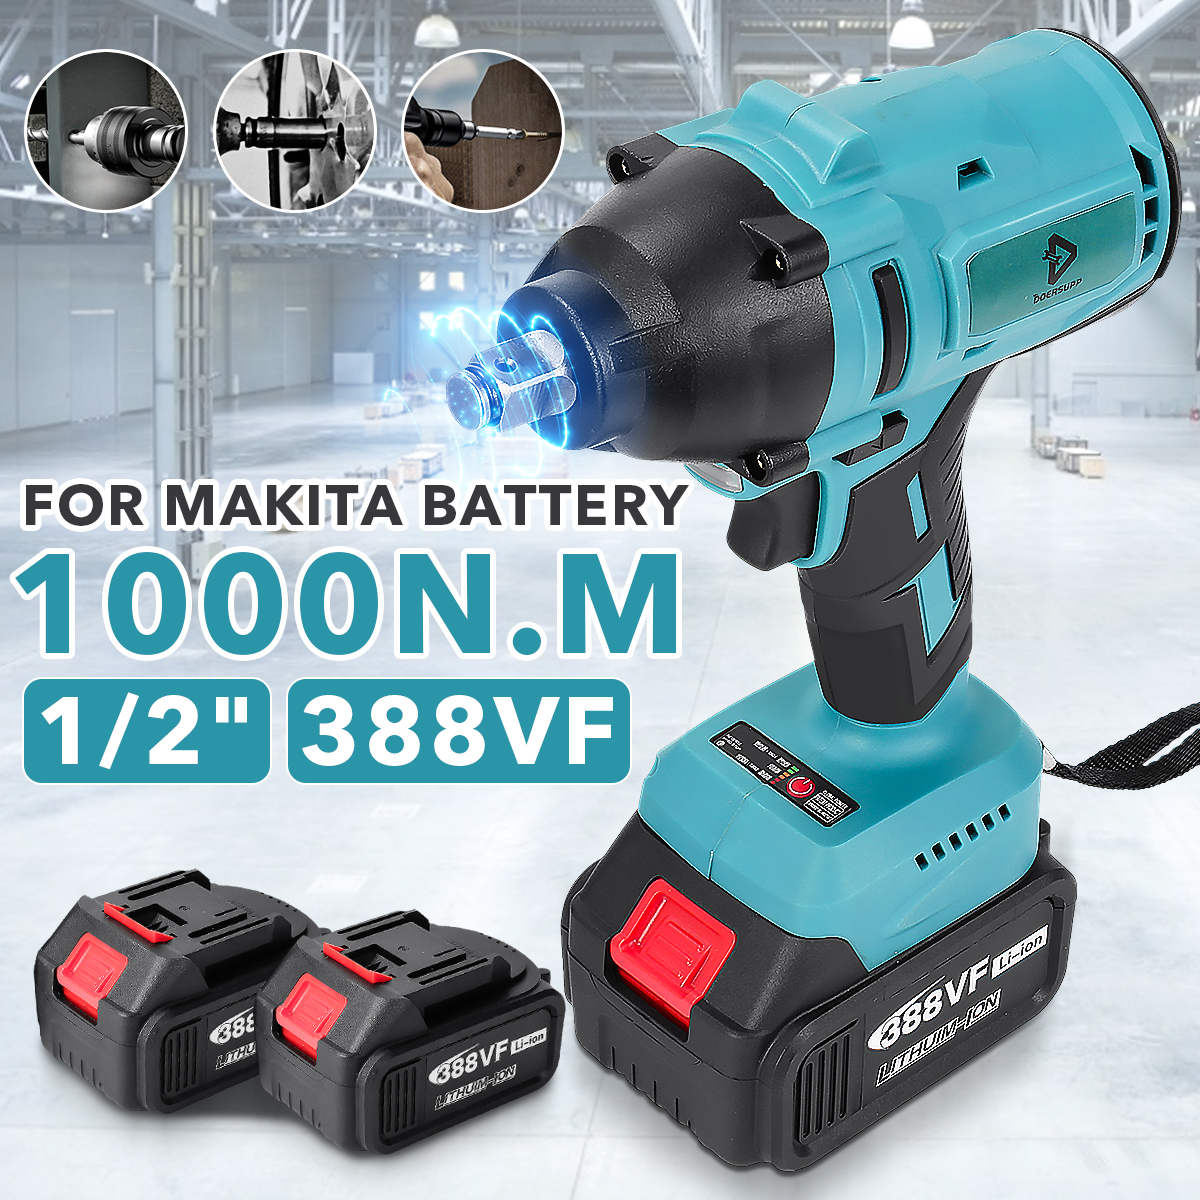 388VF-1000NM-Electric-Brushless-Impact-Wrench--Rechargeable-Woodworking-Maintenance-Tools-Garden-Too-1905107-2